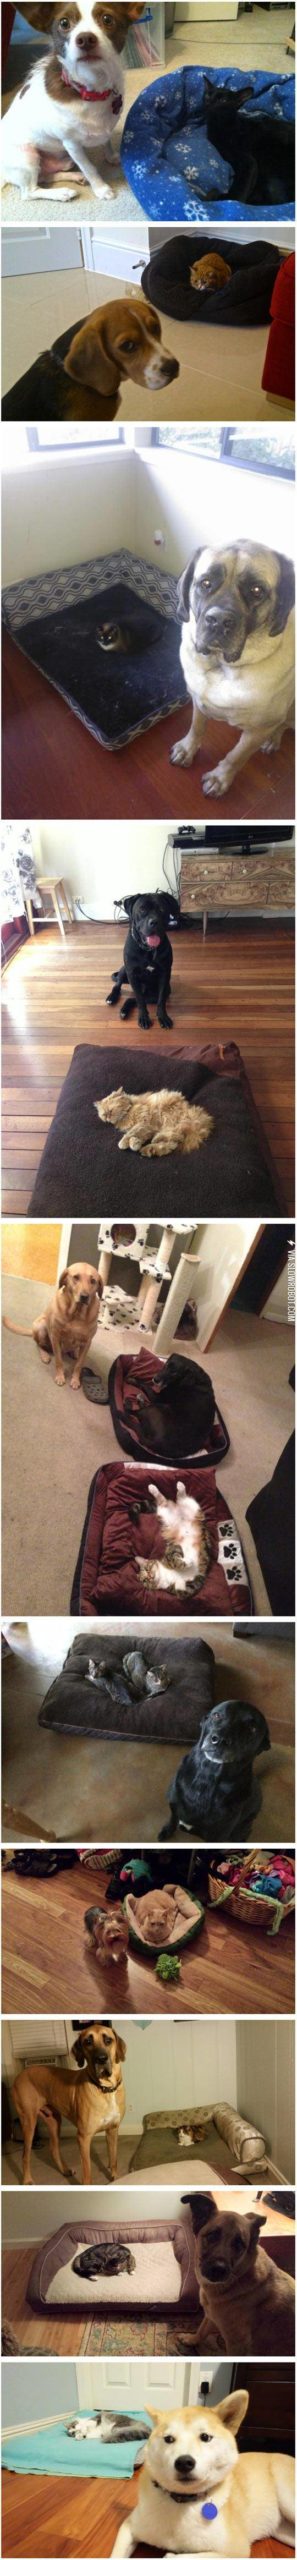 10+Dog+Beds+Stolen+By+Cats